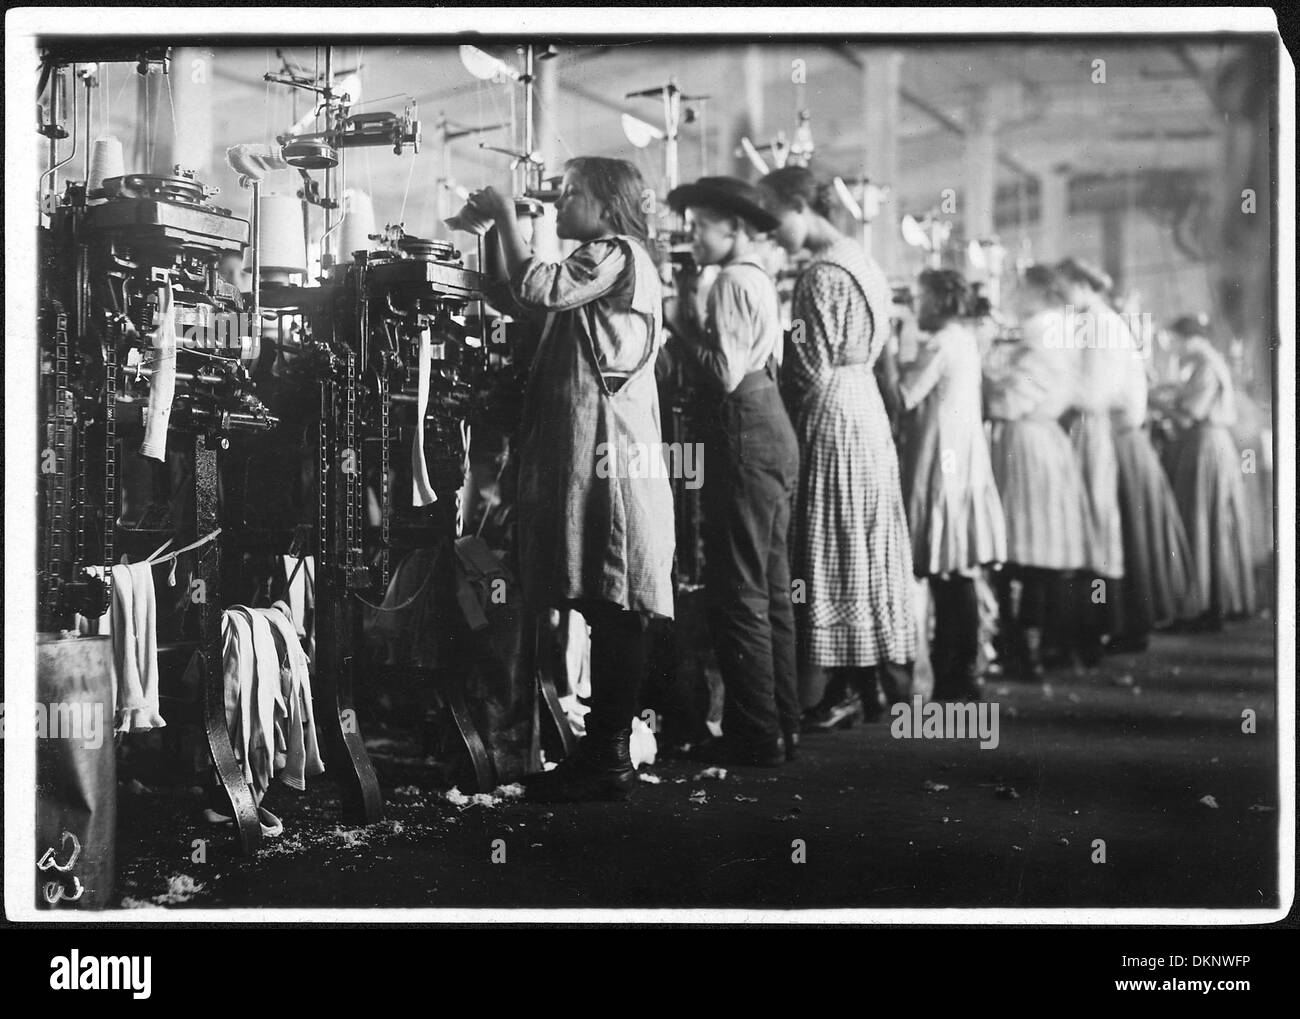 Some of the young knitters in London Hosiery Mills. Photo during work hours. London, Tenn. 523369 Stock Photo